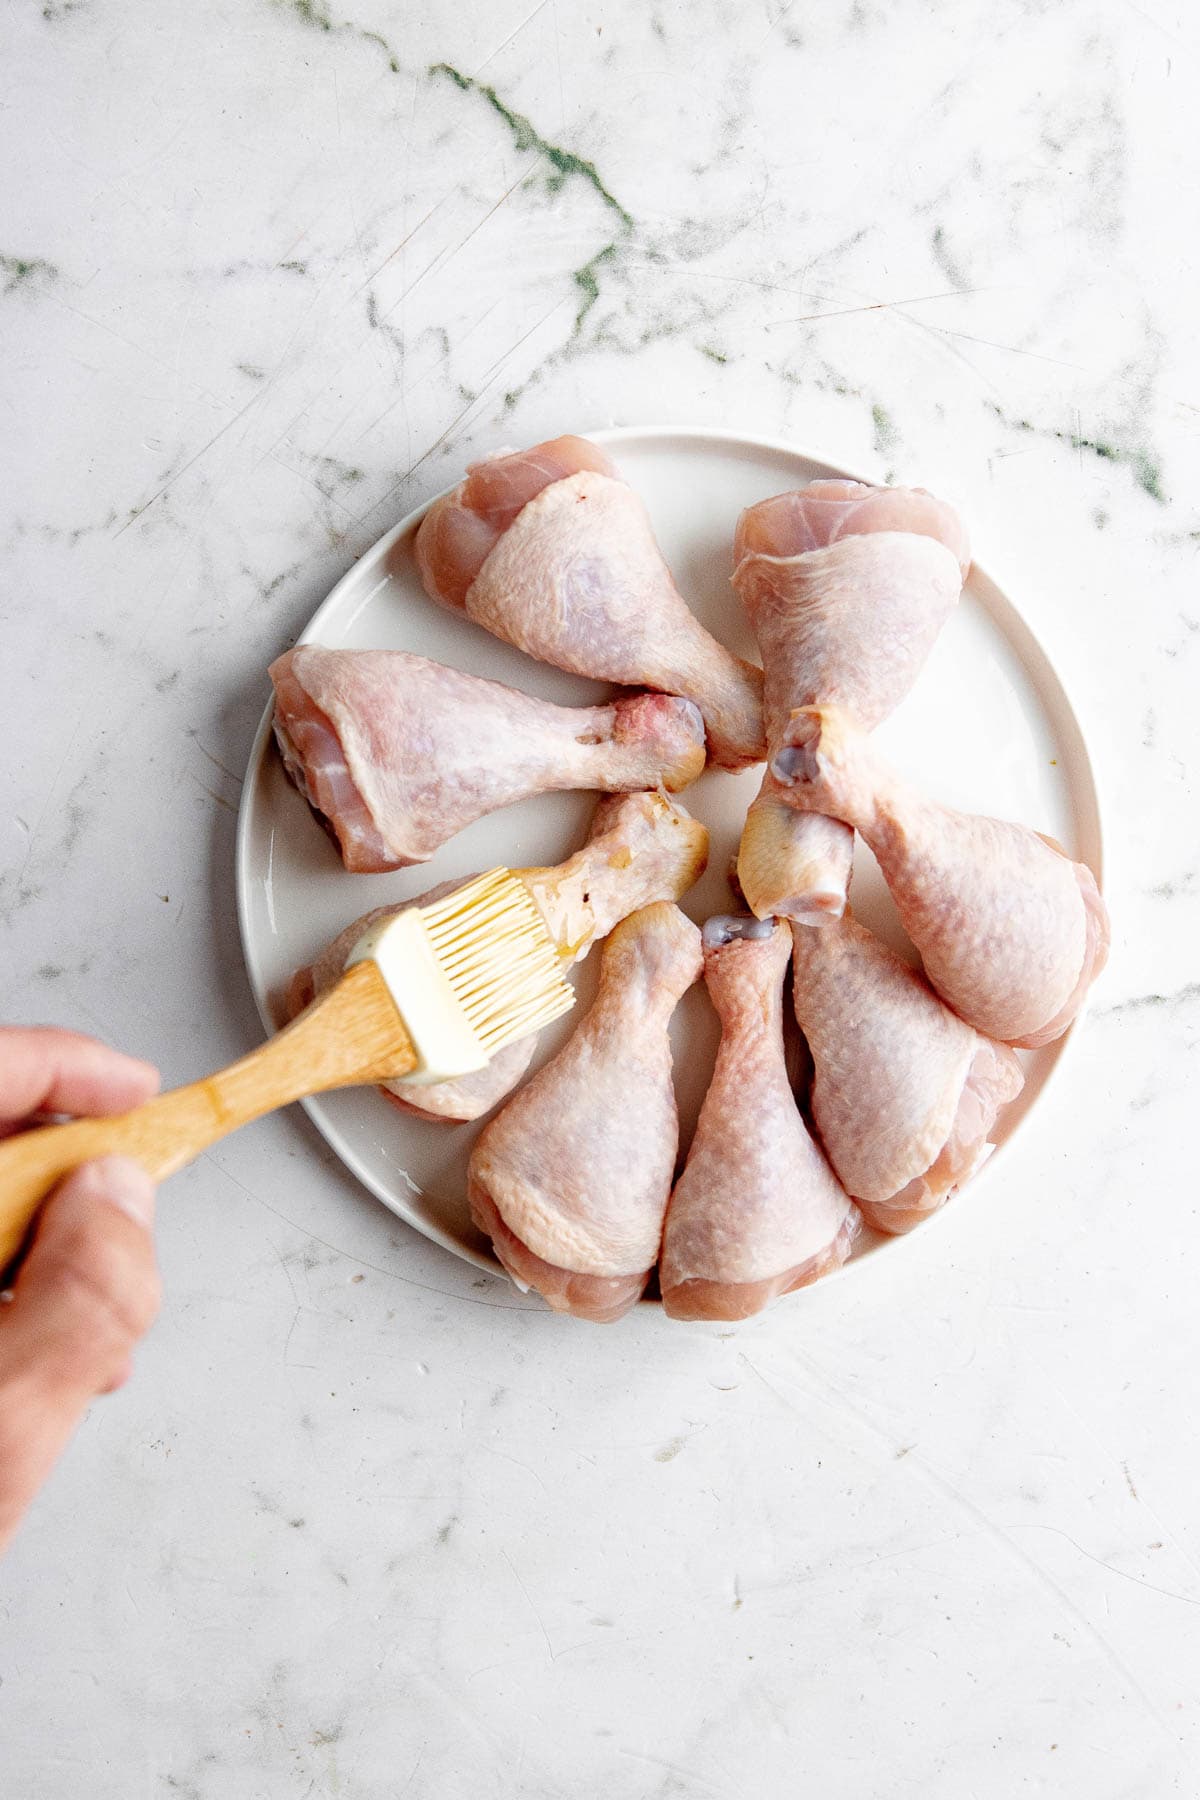 Brushing the chicken with oil.